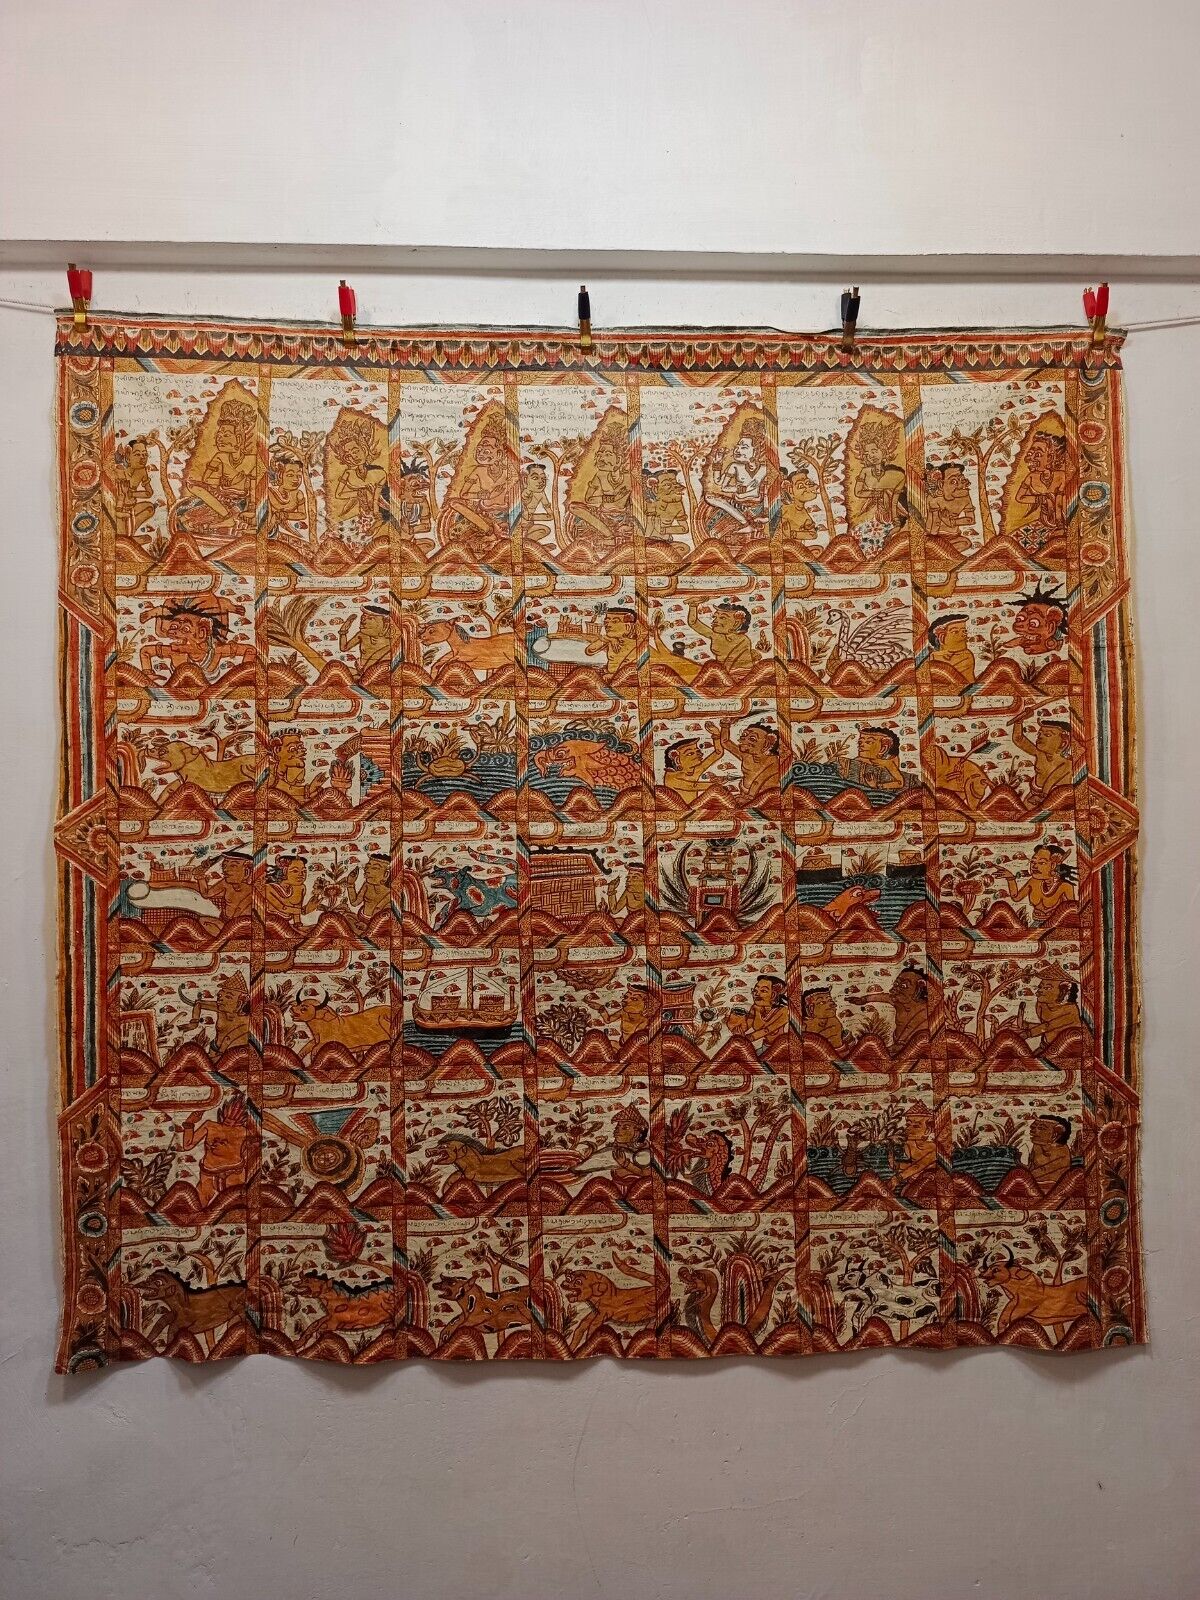 Vintage Gorgeous Hand Painted Indonesian Textile Wall Hanging 129×135 Cm